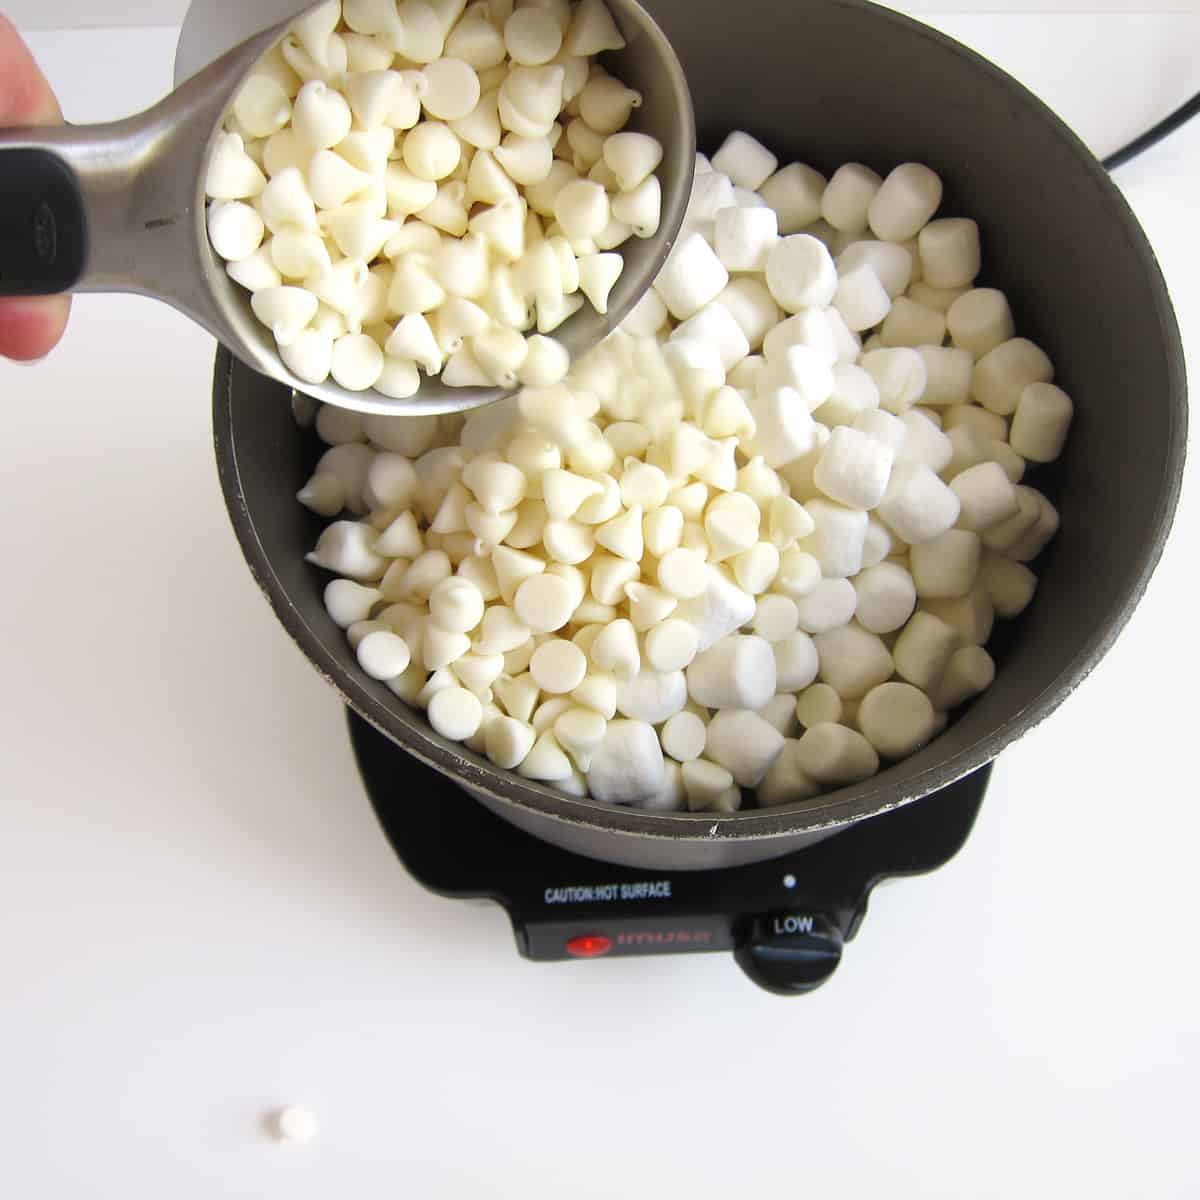 Pour white chocolate chips over the mini marshmallows.